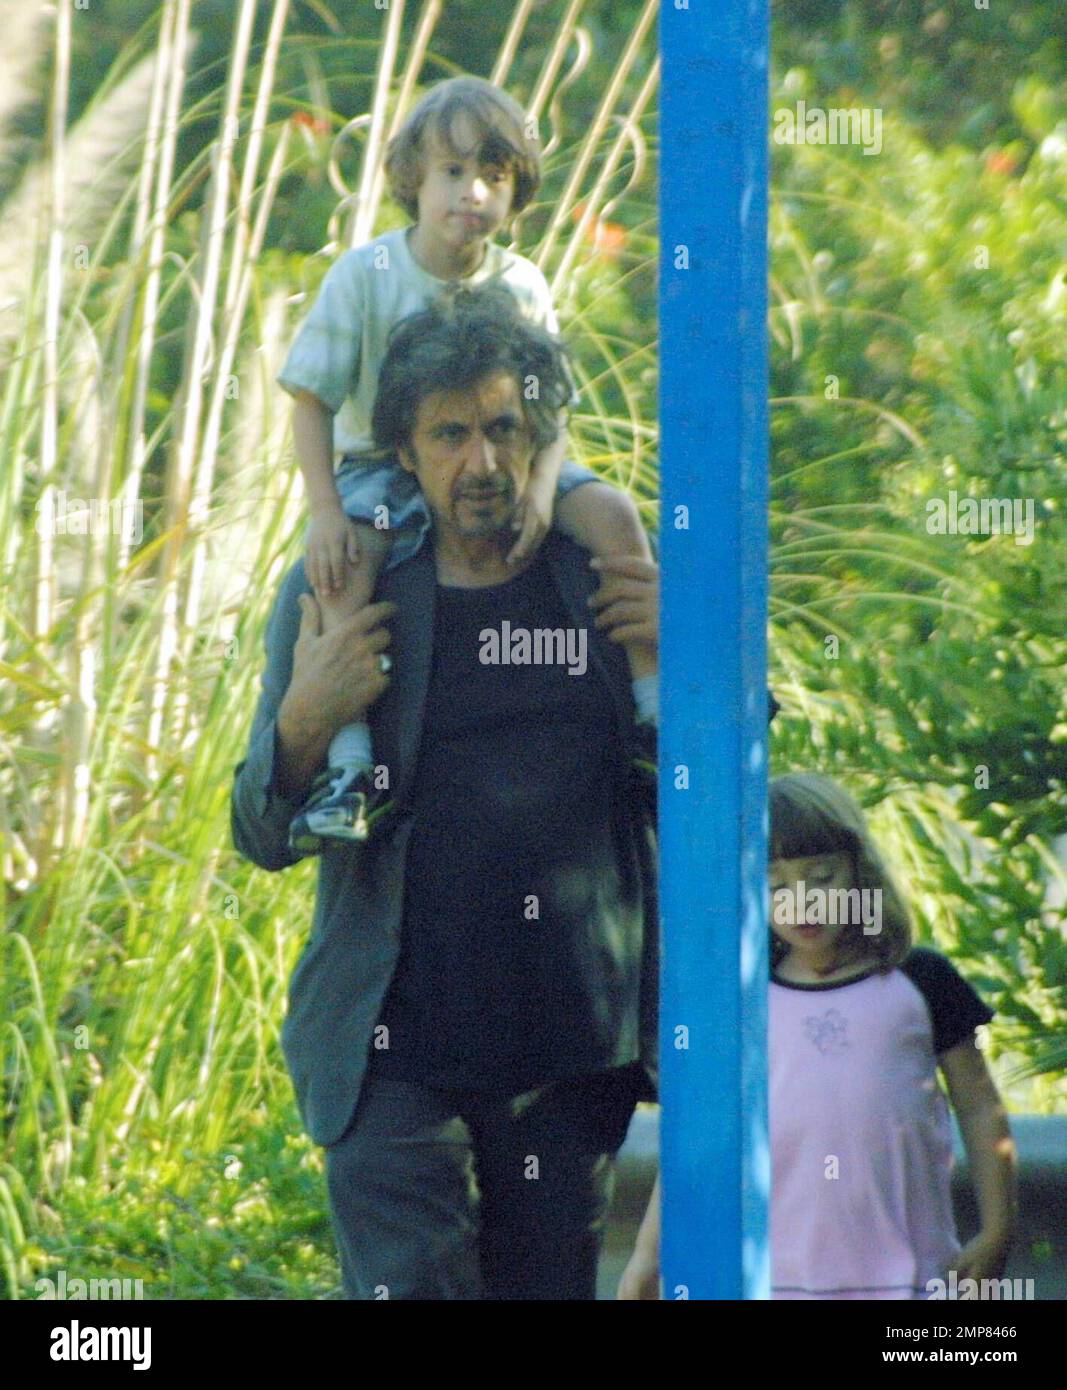 Exclusive!! Al Pacino spends an afternoon in the park with his twins Anton and Olivia, Los Angeles, Calif. 6/21/06 Stock Photo